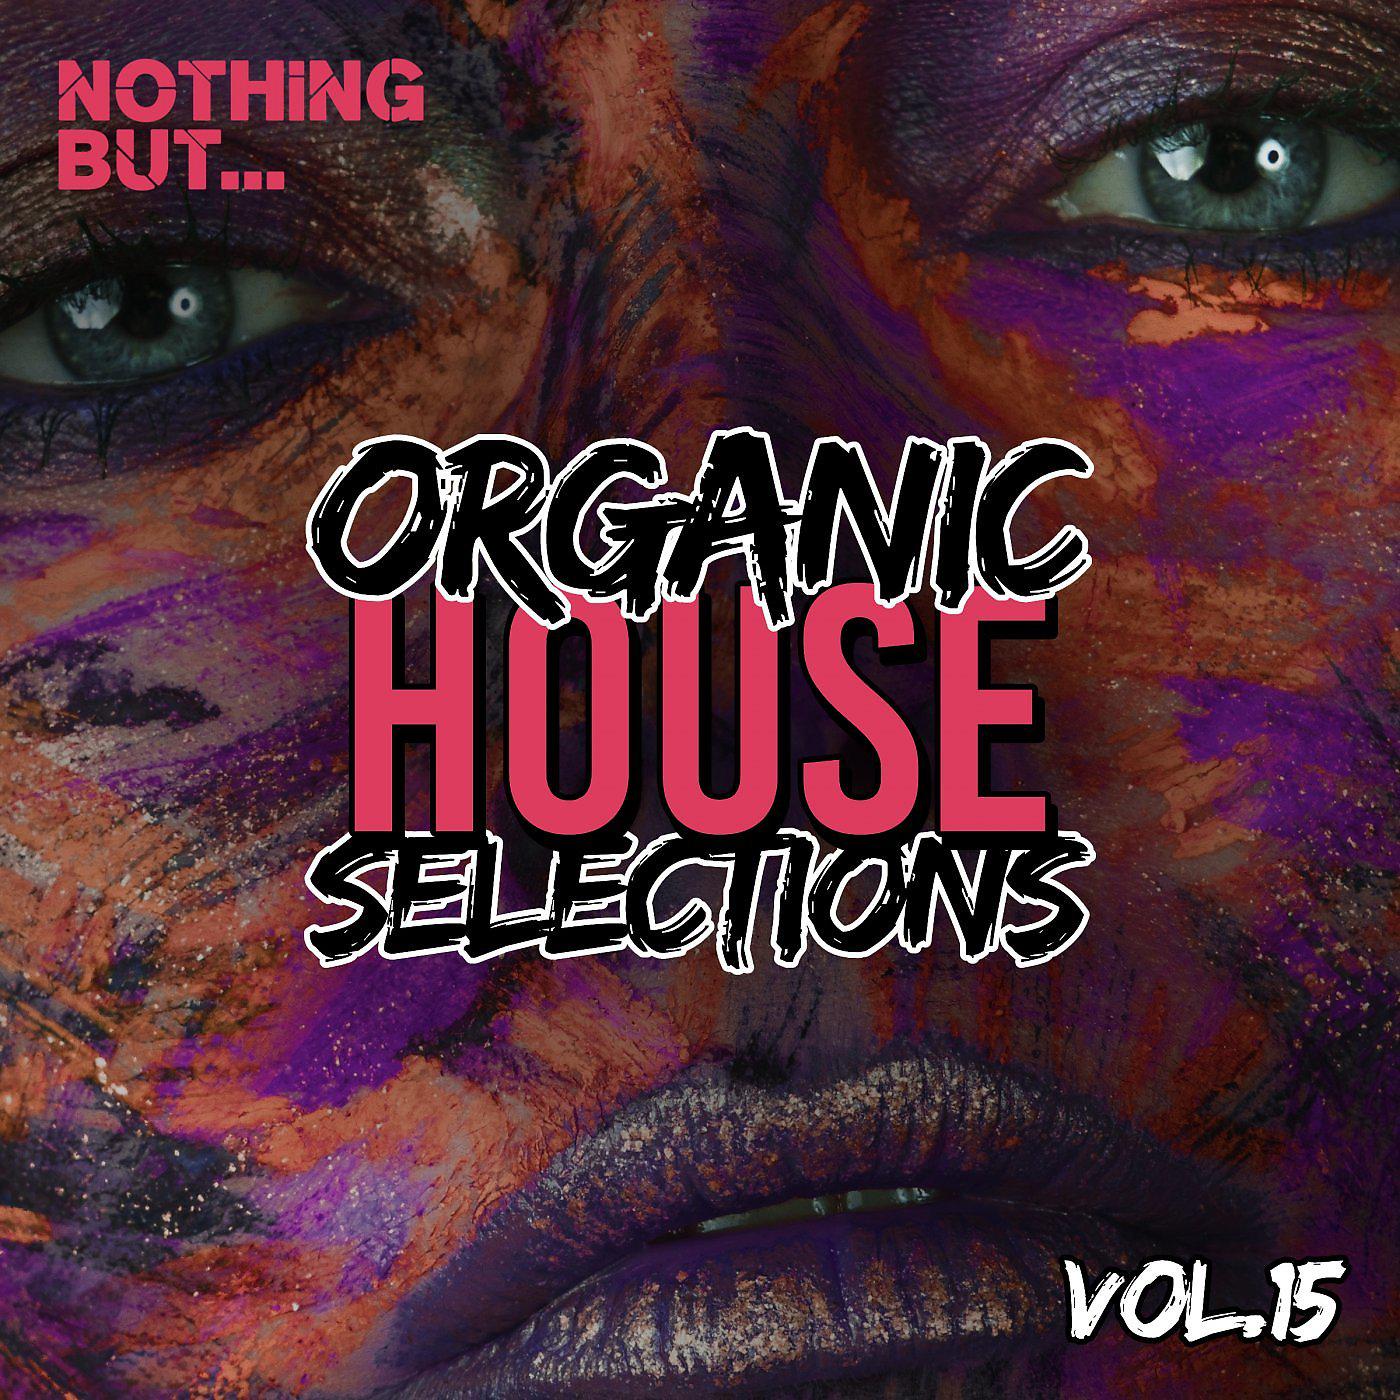 Постер альбома Nothing But... Organic House Selections, Vol. 15